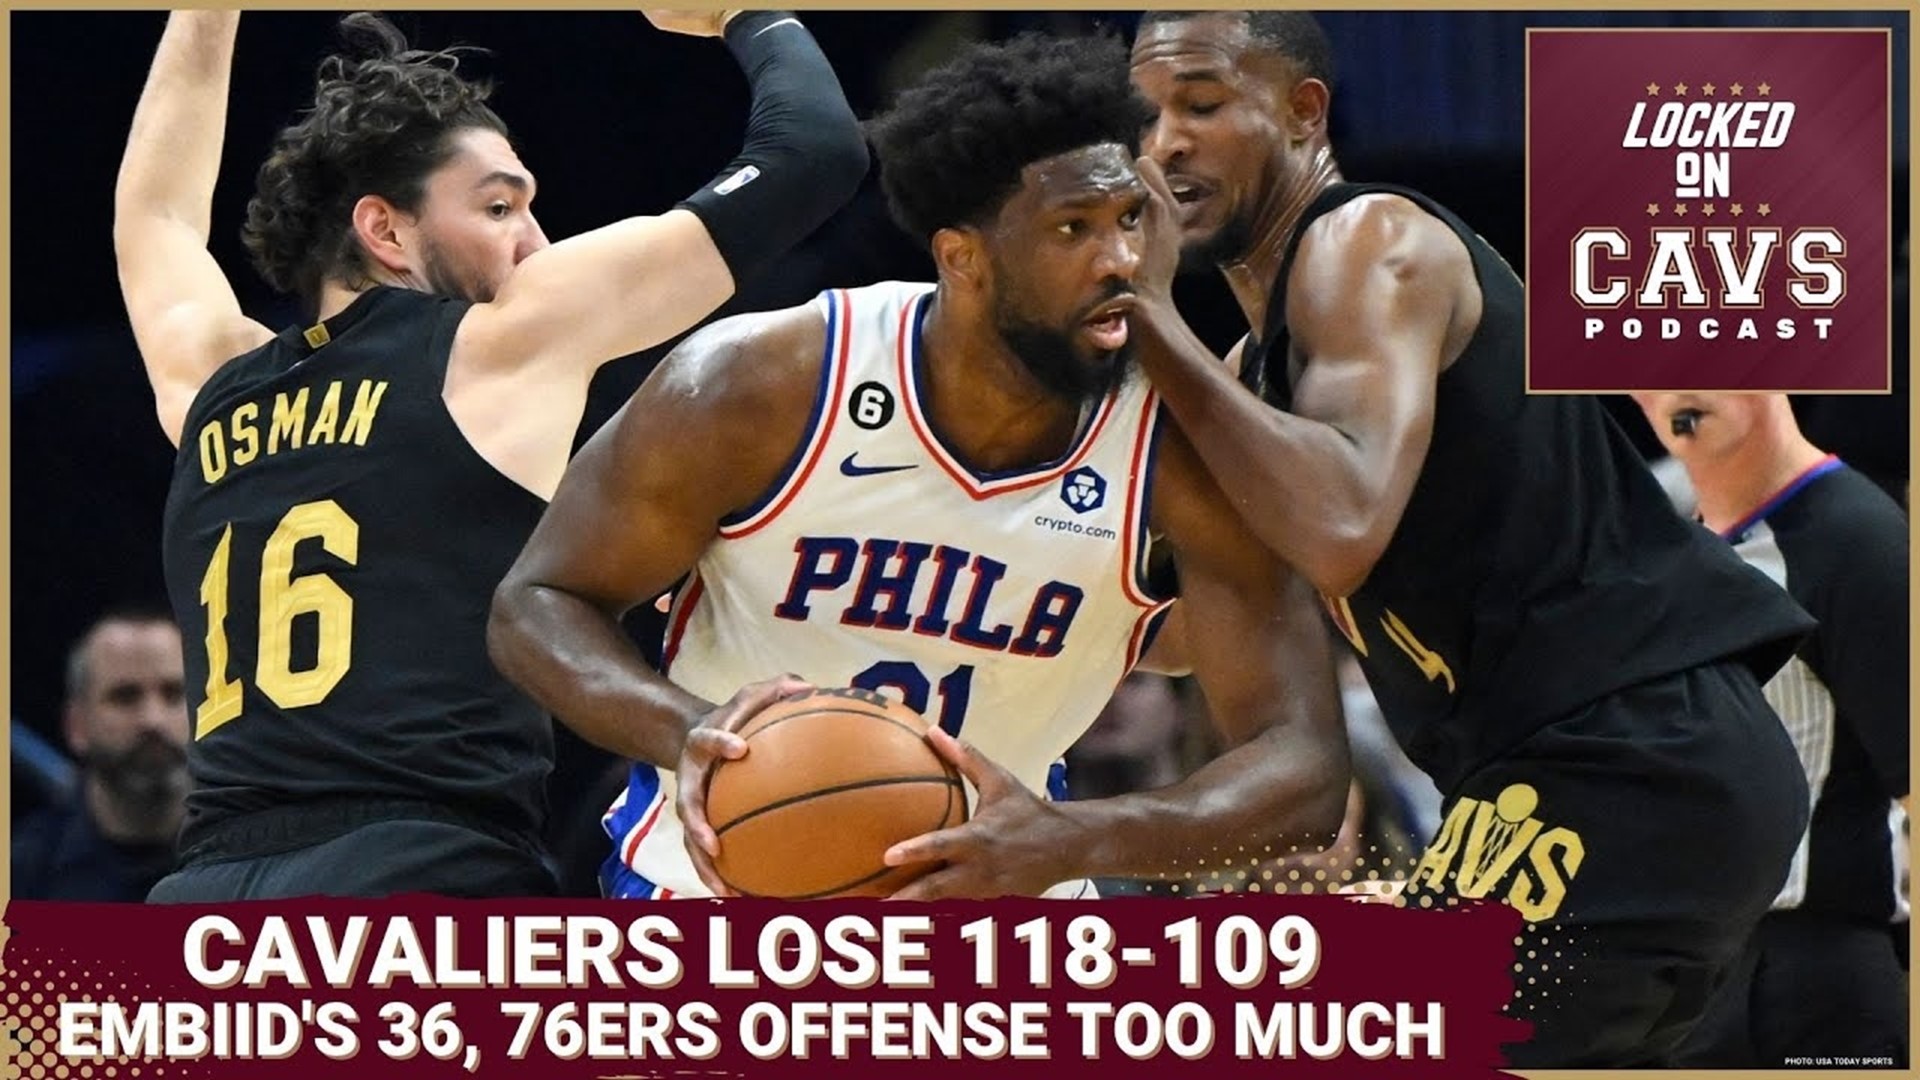 Hosts Wolf Manning and Evan Dammarell talk about Wednesday night’s Cavs-76ers game and why Cleveland played well despite the loss.